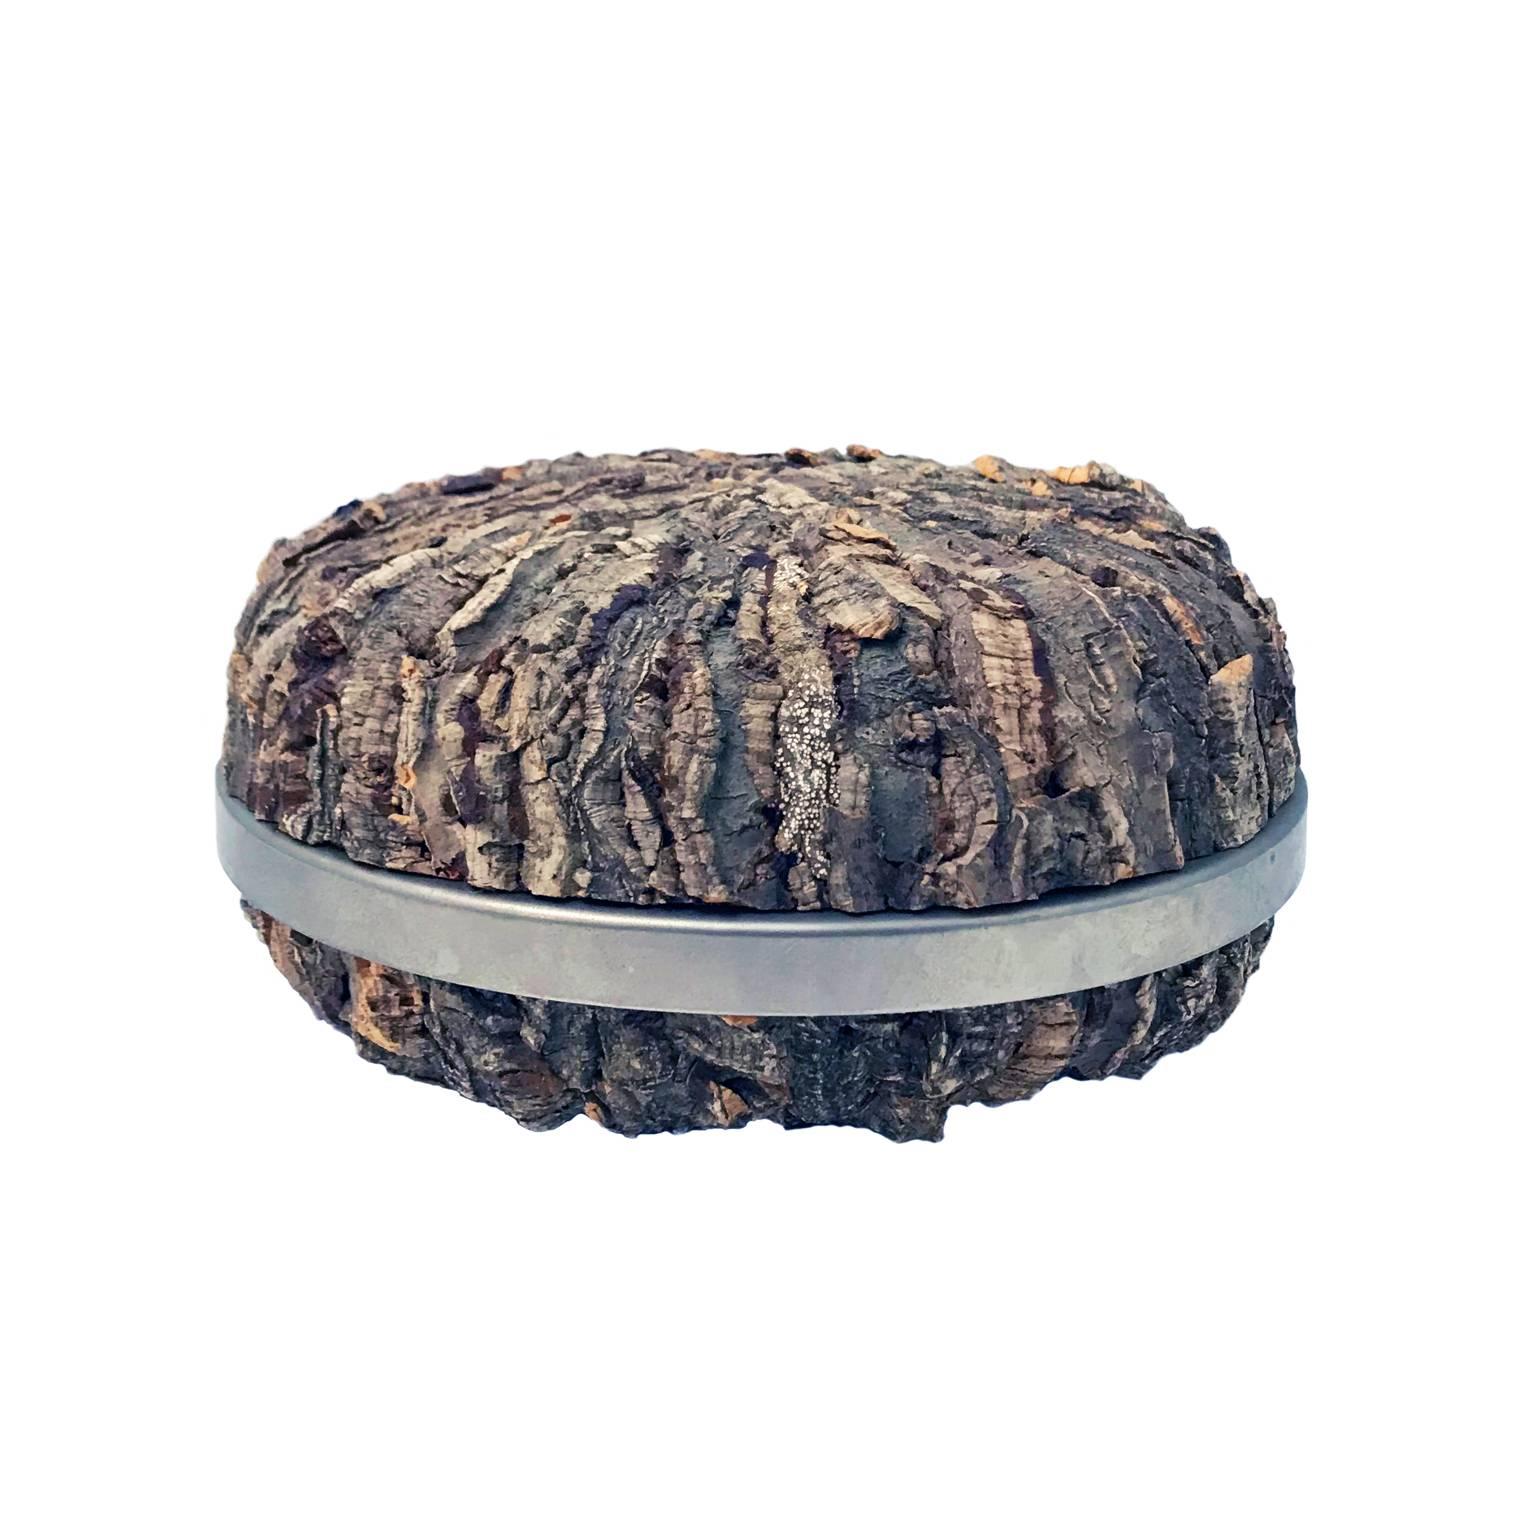 1970s Italian Round Bark Box with Stainless Steel Band by Gabriella Crespi